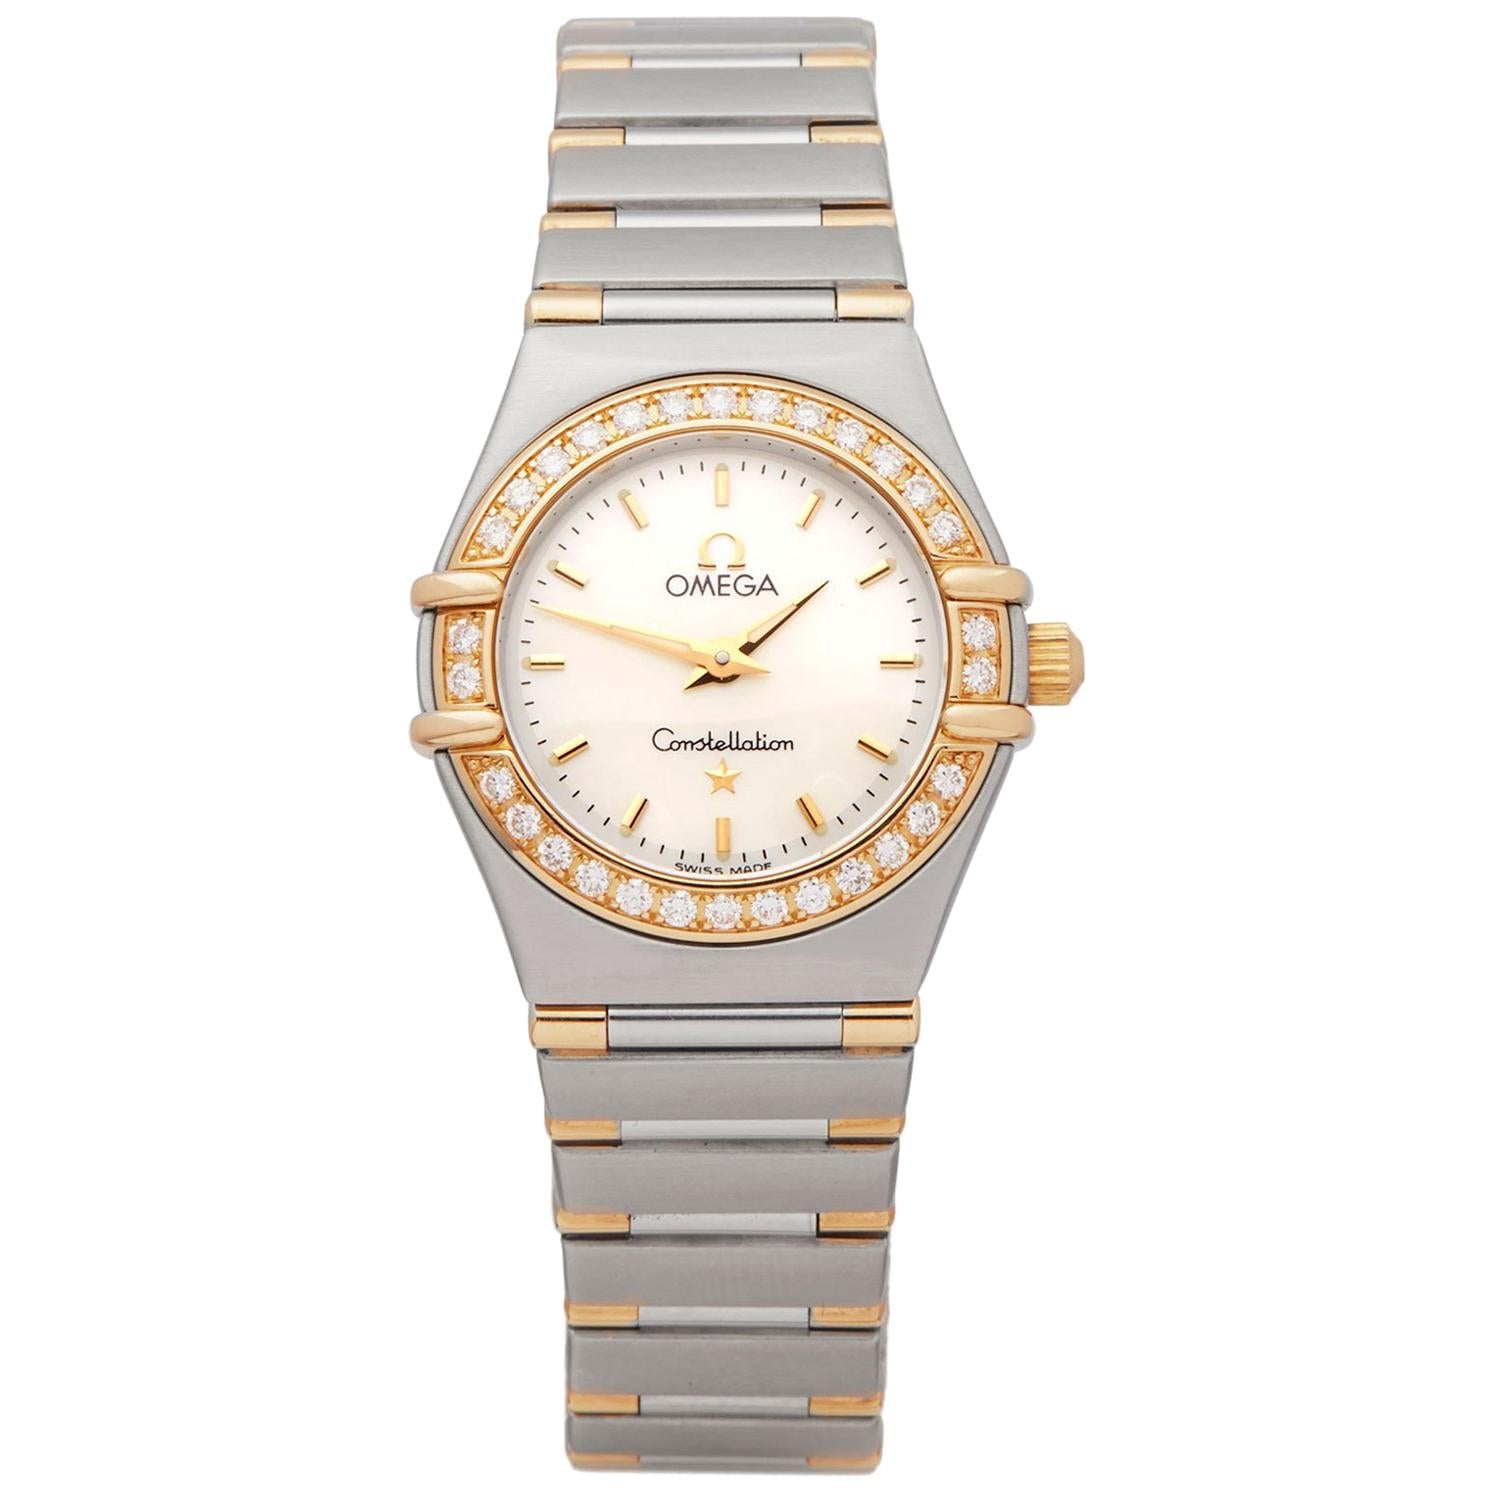 Omega Constellation Stainless Steel and 18K Yellow Gold 1277.3 Wristwatch